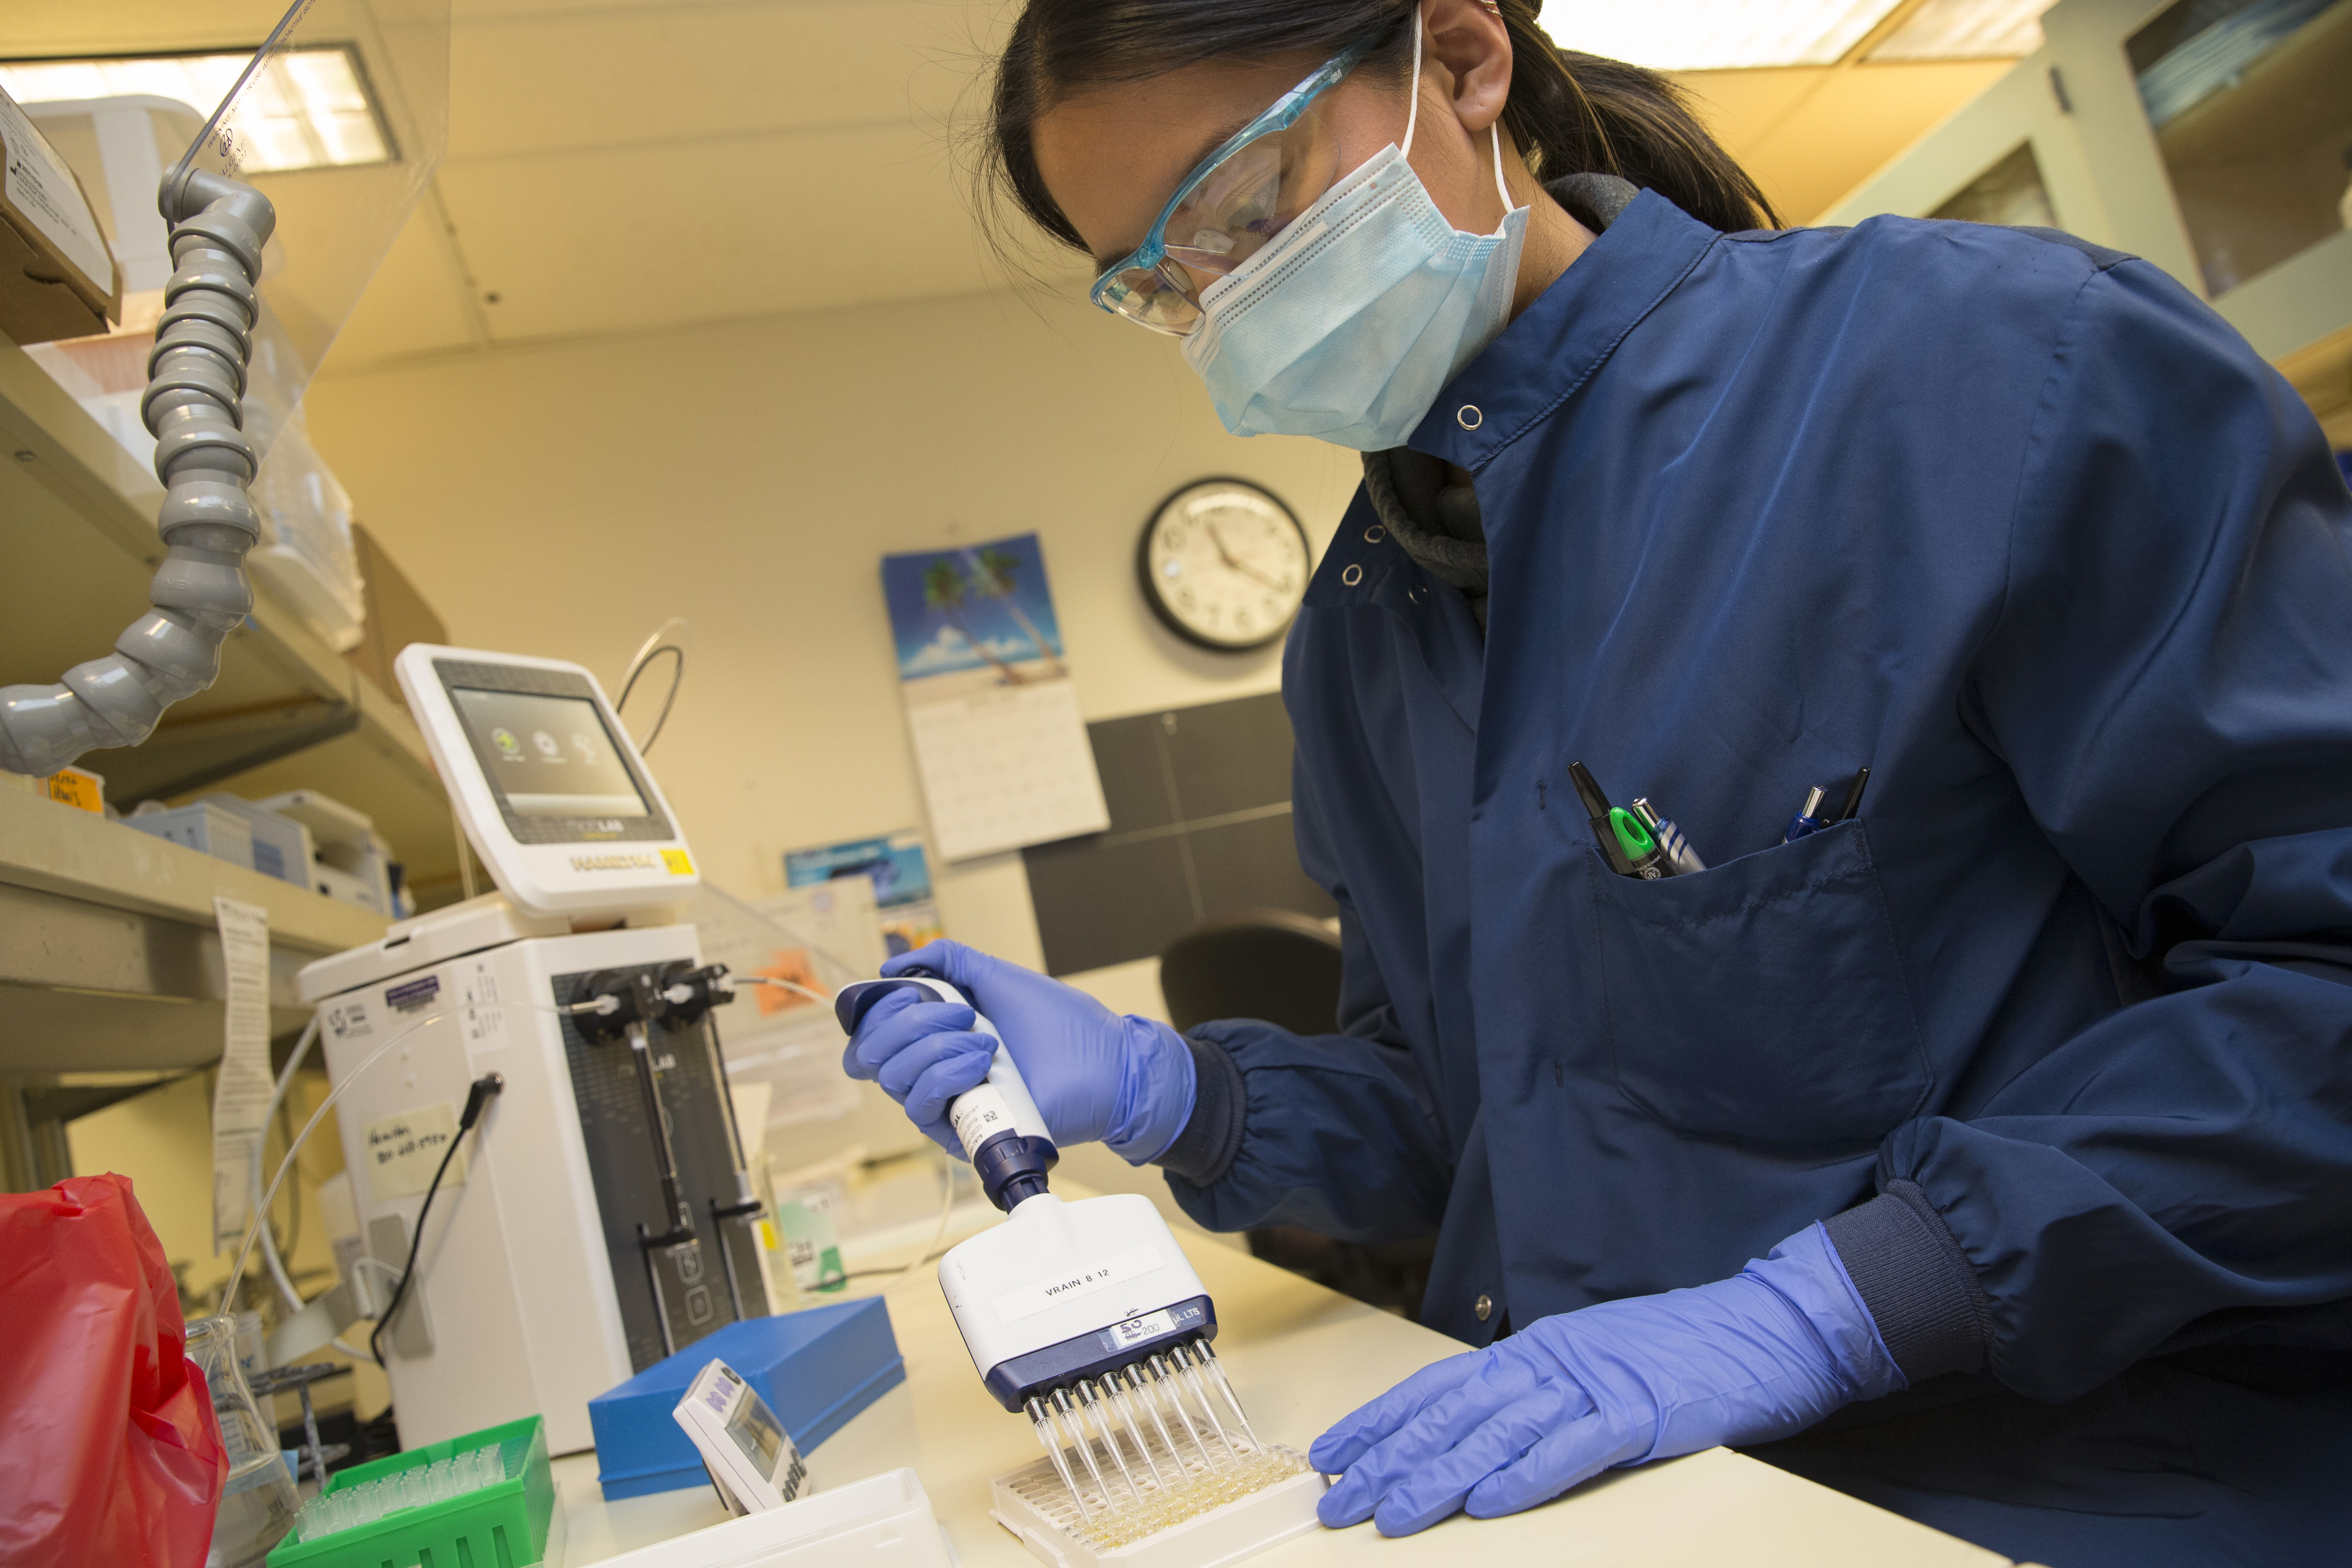 Medical laboratory scientist, Alicia Bui, runs a clinical test in the Immunology lab at UW Medicine looking for antibodies against SARS-CoV-2. (Photo by Karen Ducey/Getty Images)